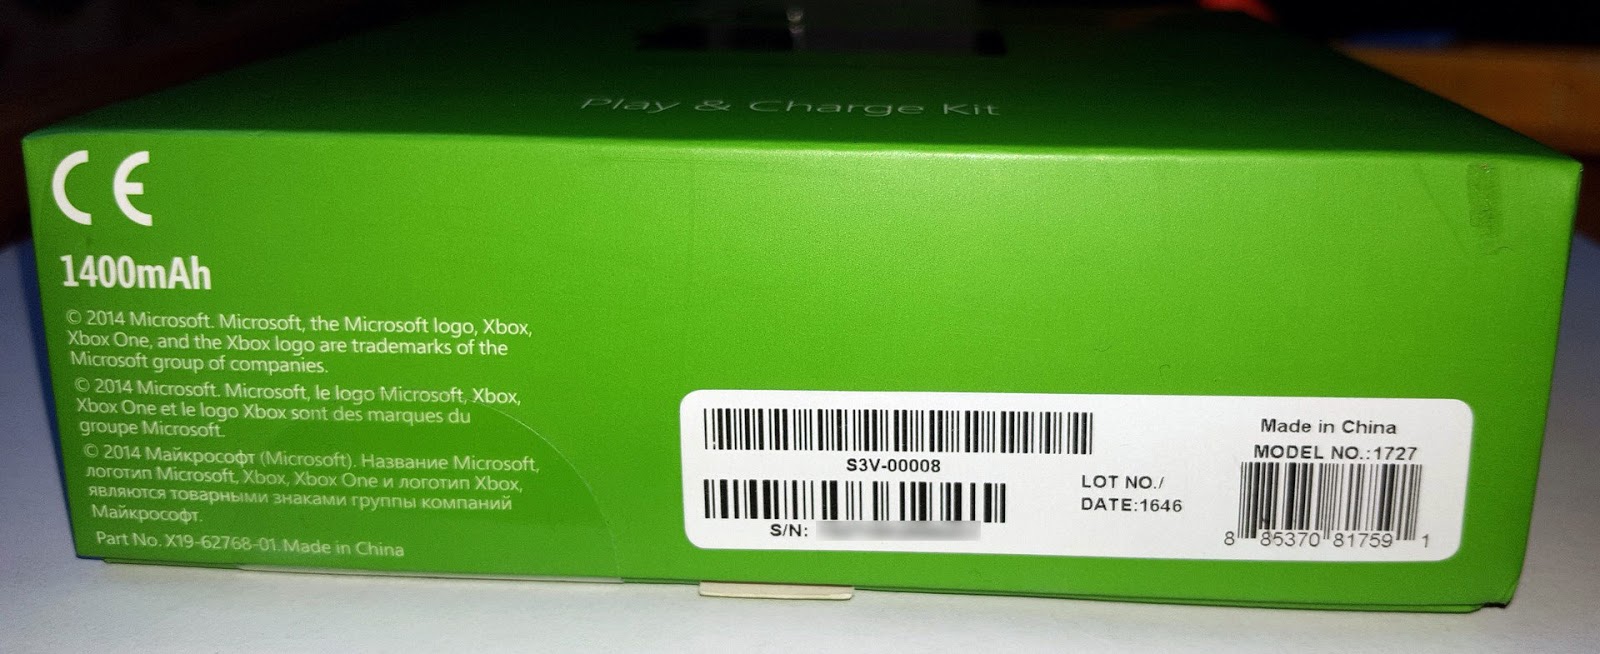 xbox 360 serial number search